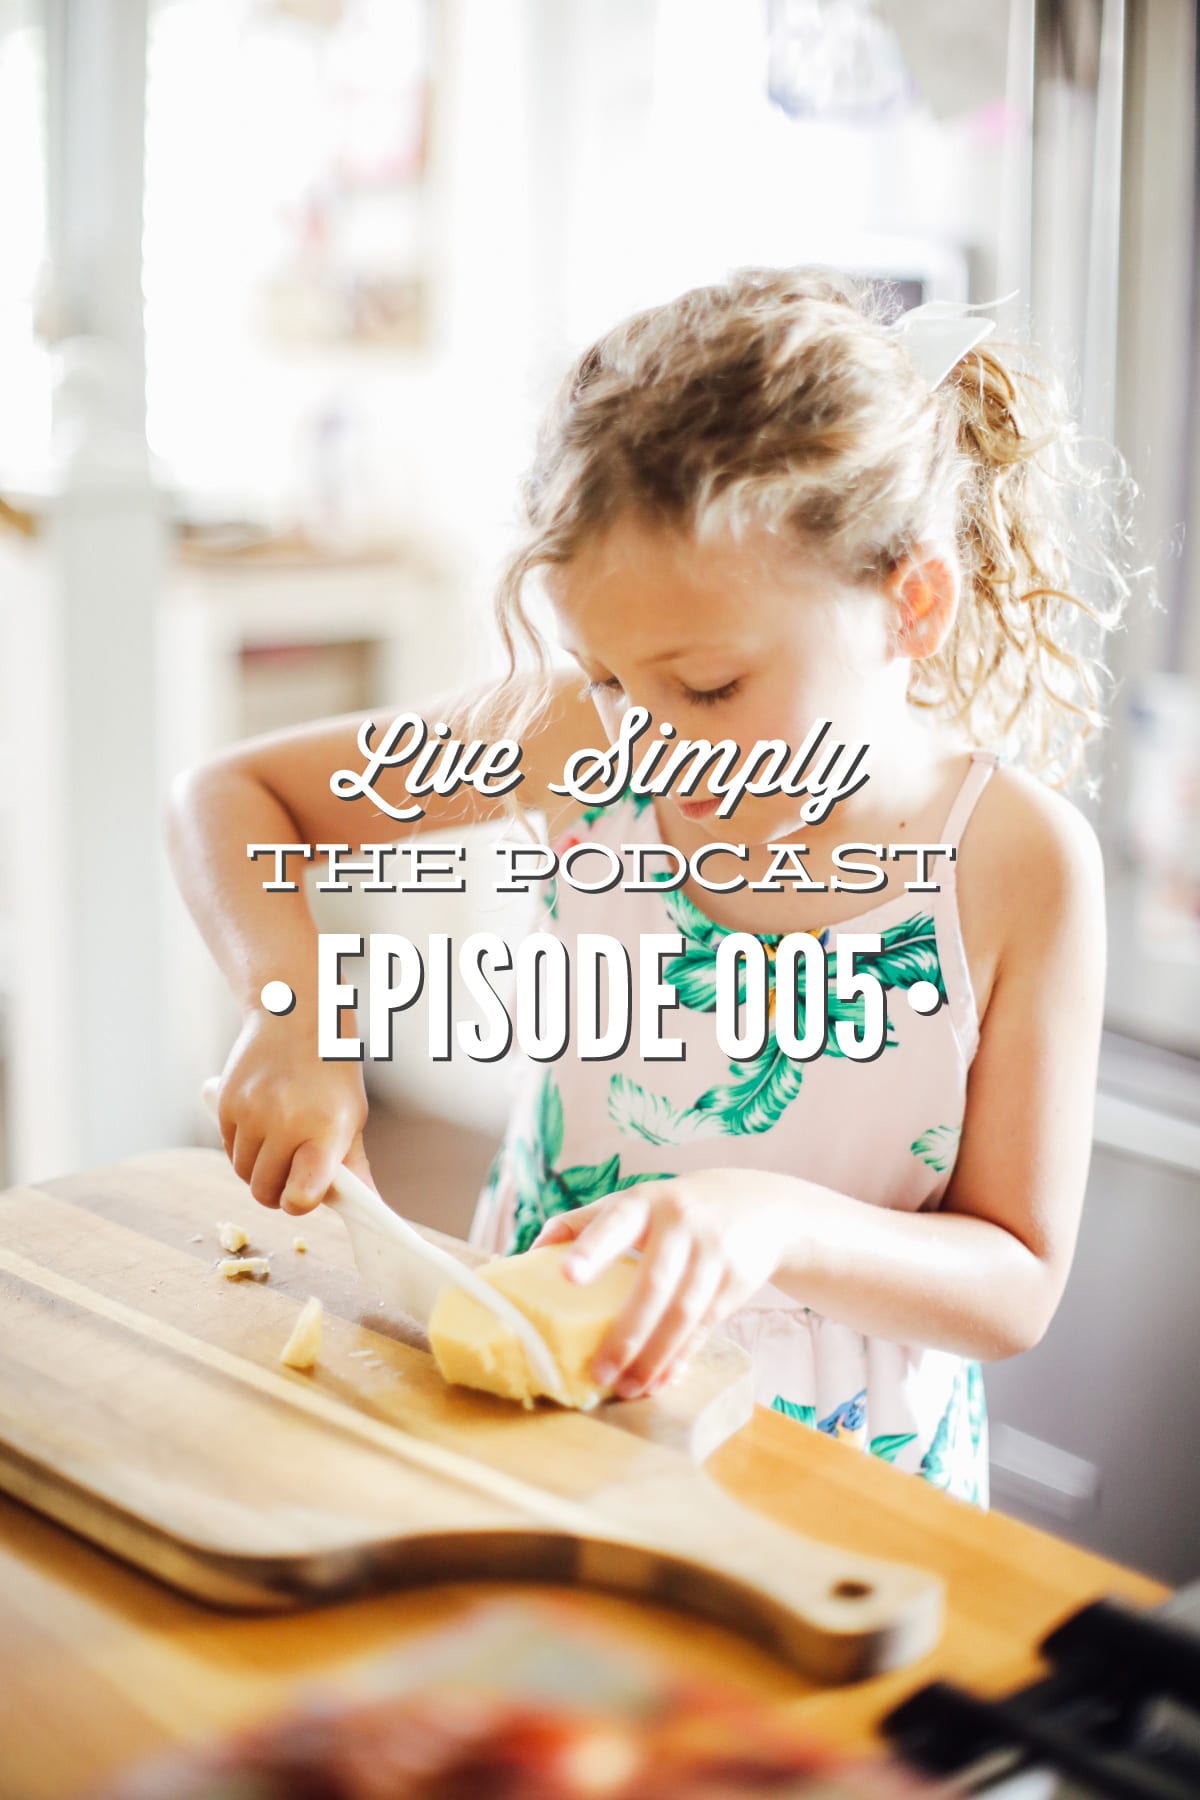 Podcast 005: Raising Kids Who Eat a Variety of Real Food, Picky Eaters, and School Lunch with Taesha from The Natural Nurturer